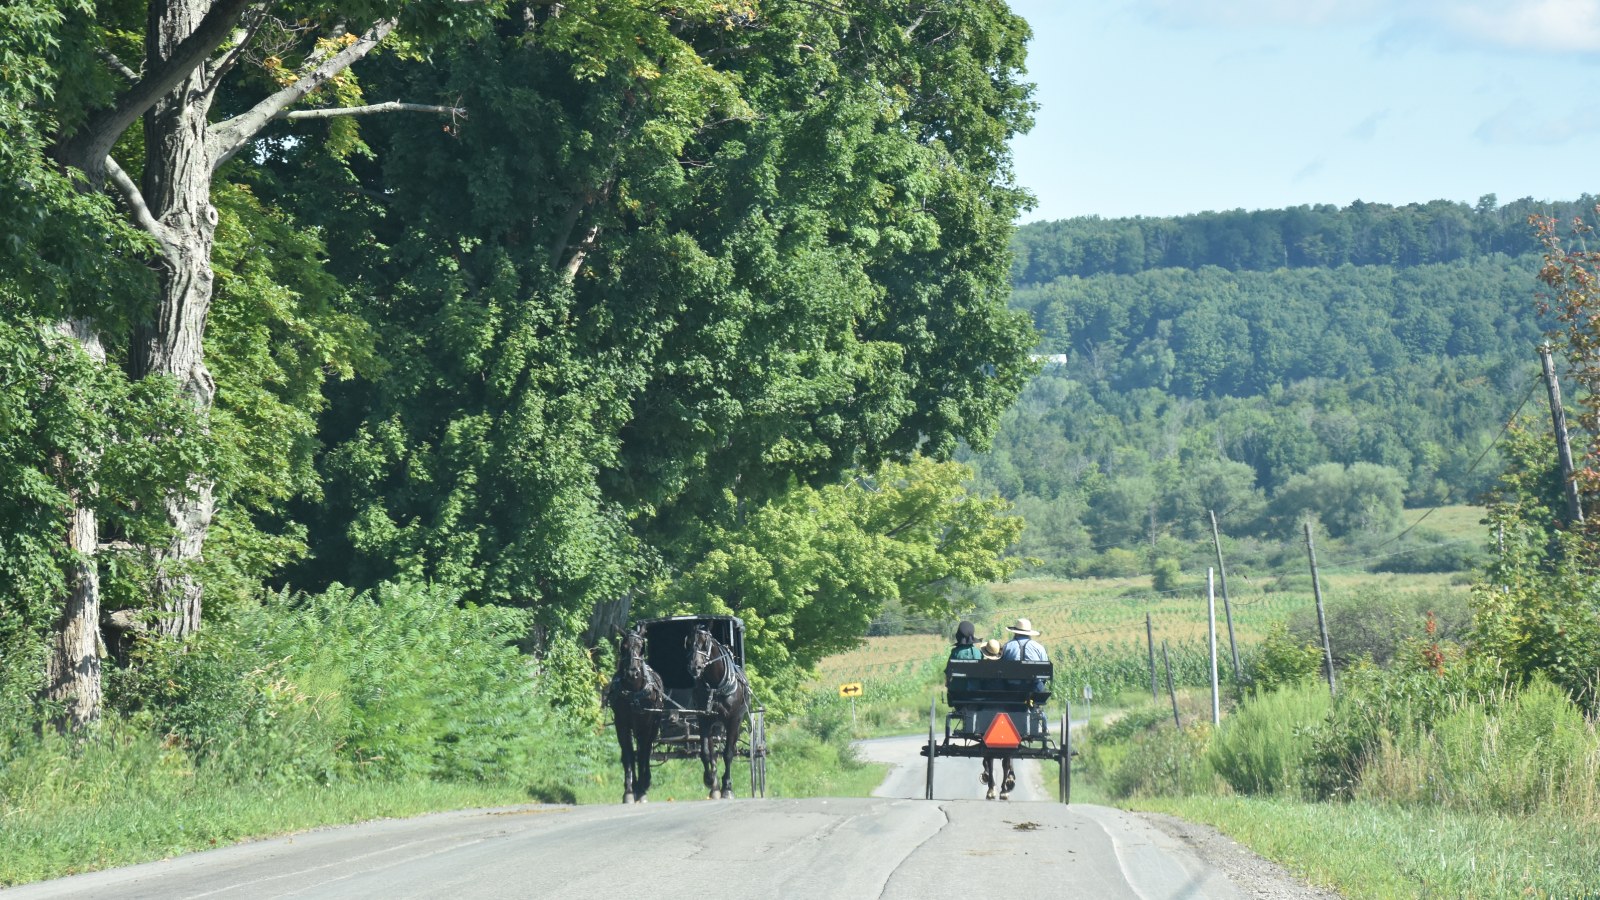 Amish Buggies passing on a summer day